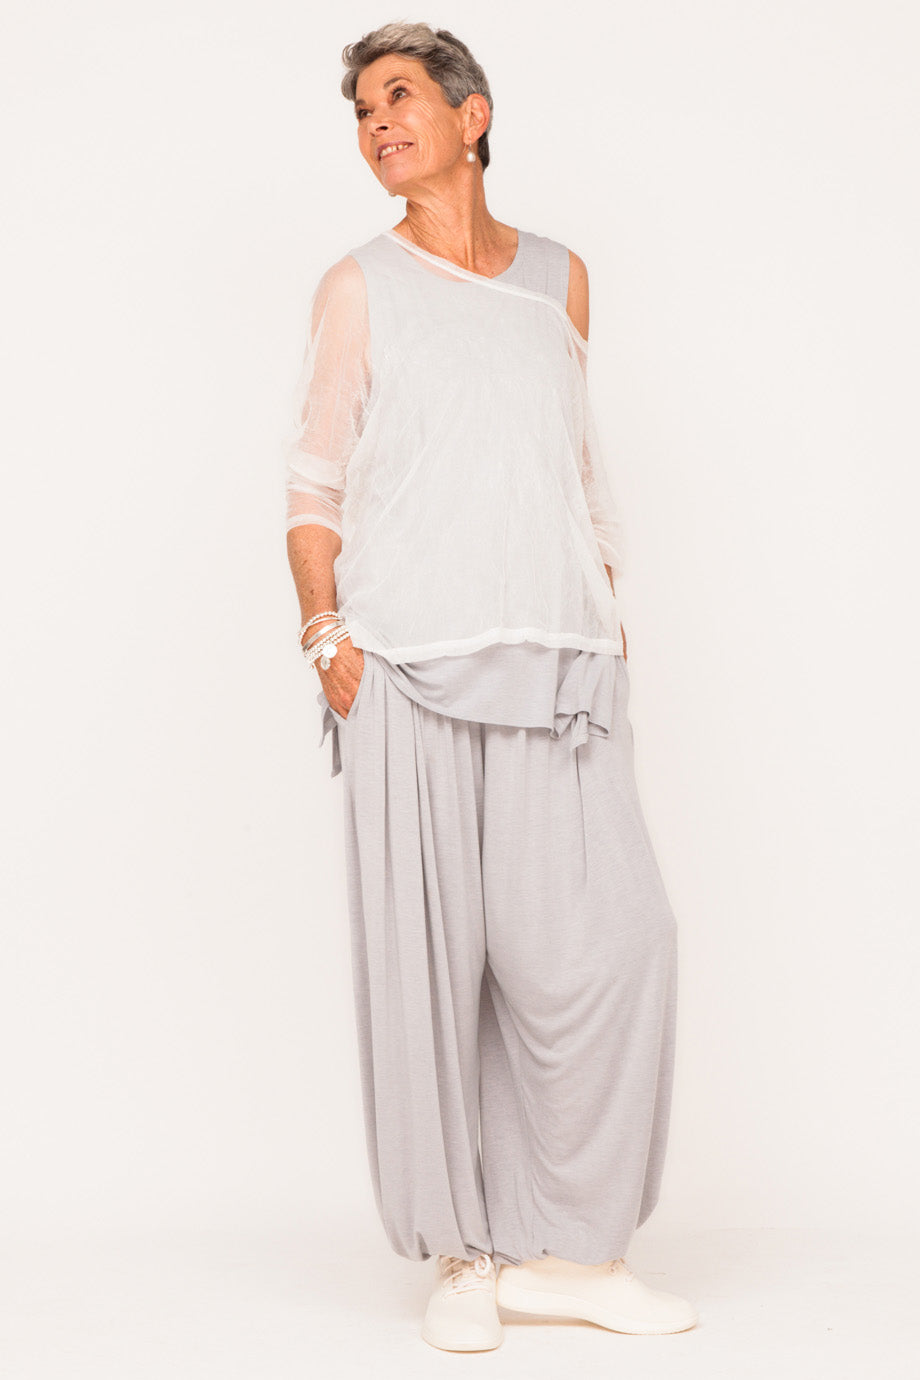 womens-designer-track-suit-tank-top-womens-grey-one-size-track-pant-mesh-boxy-top